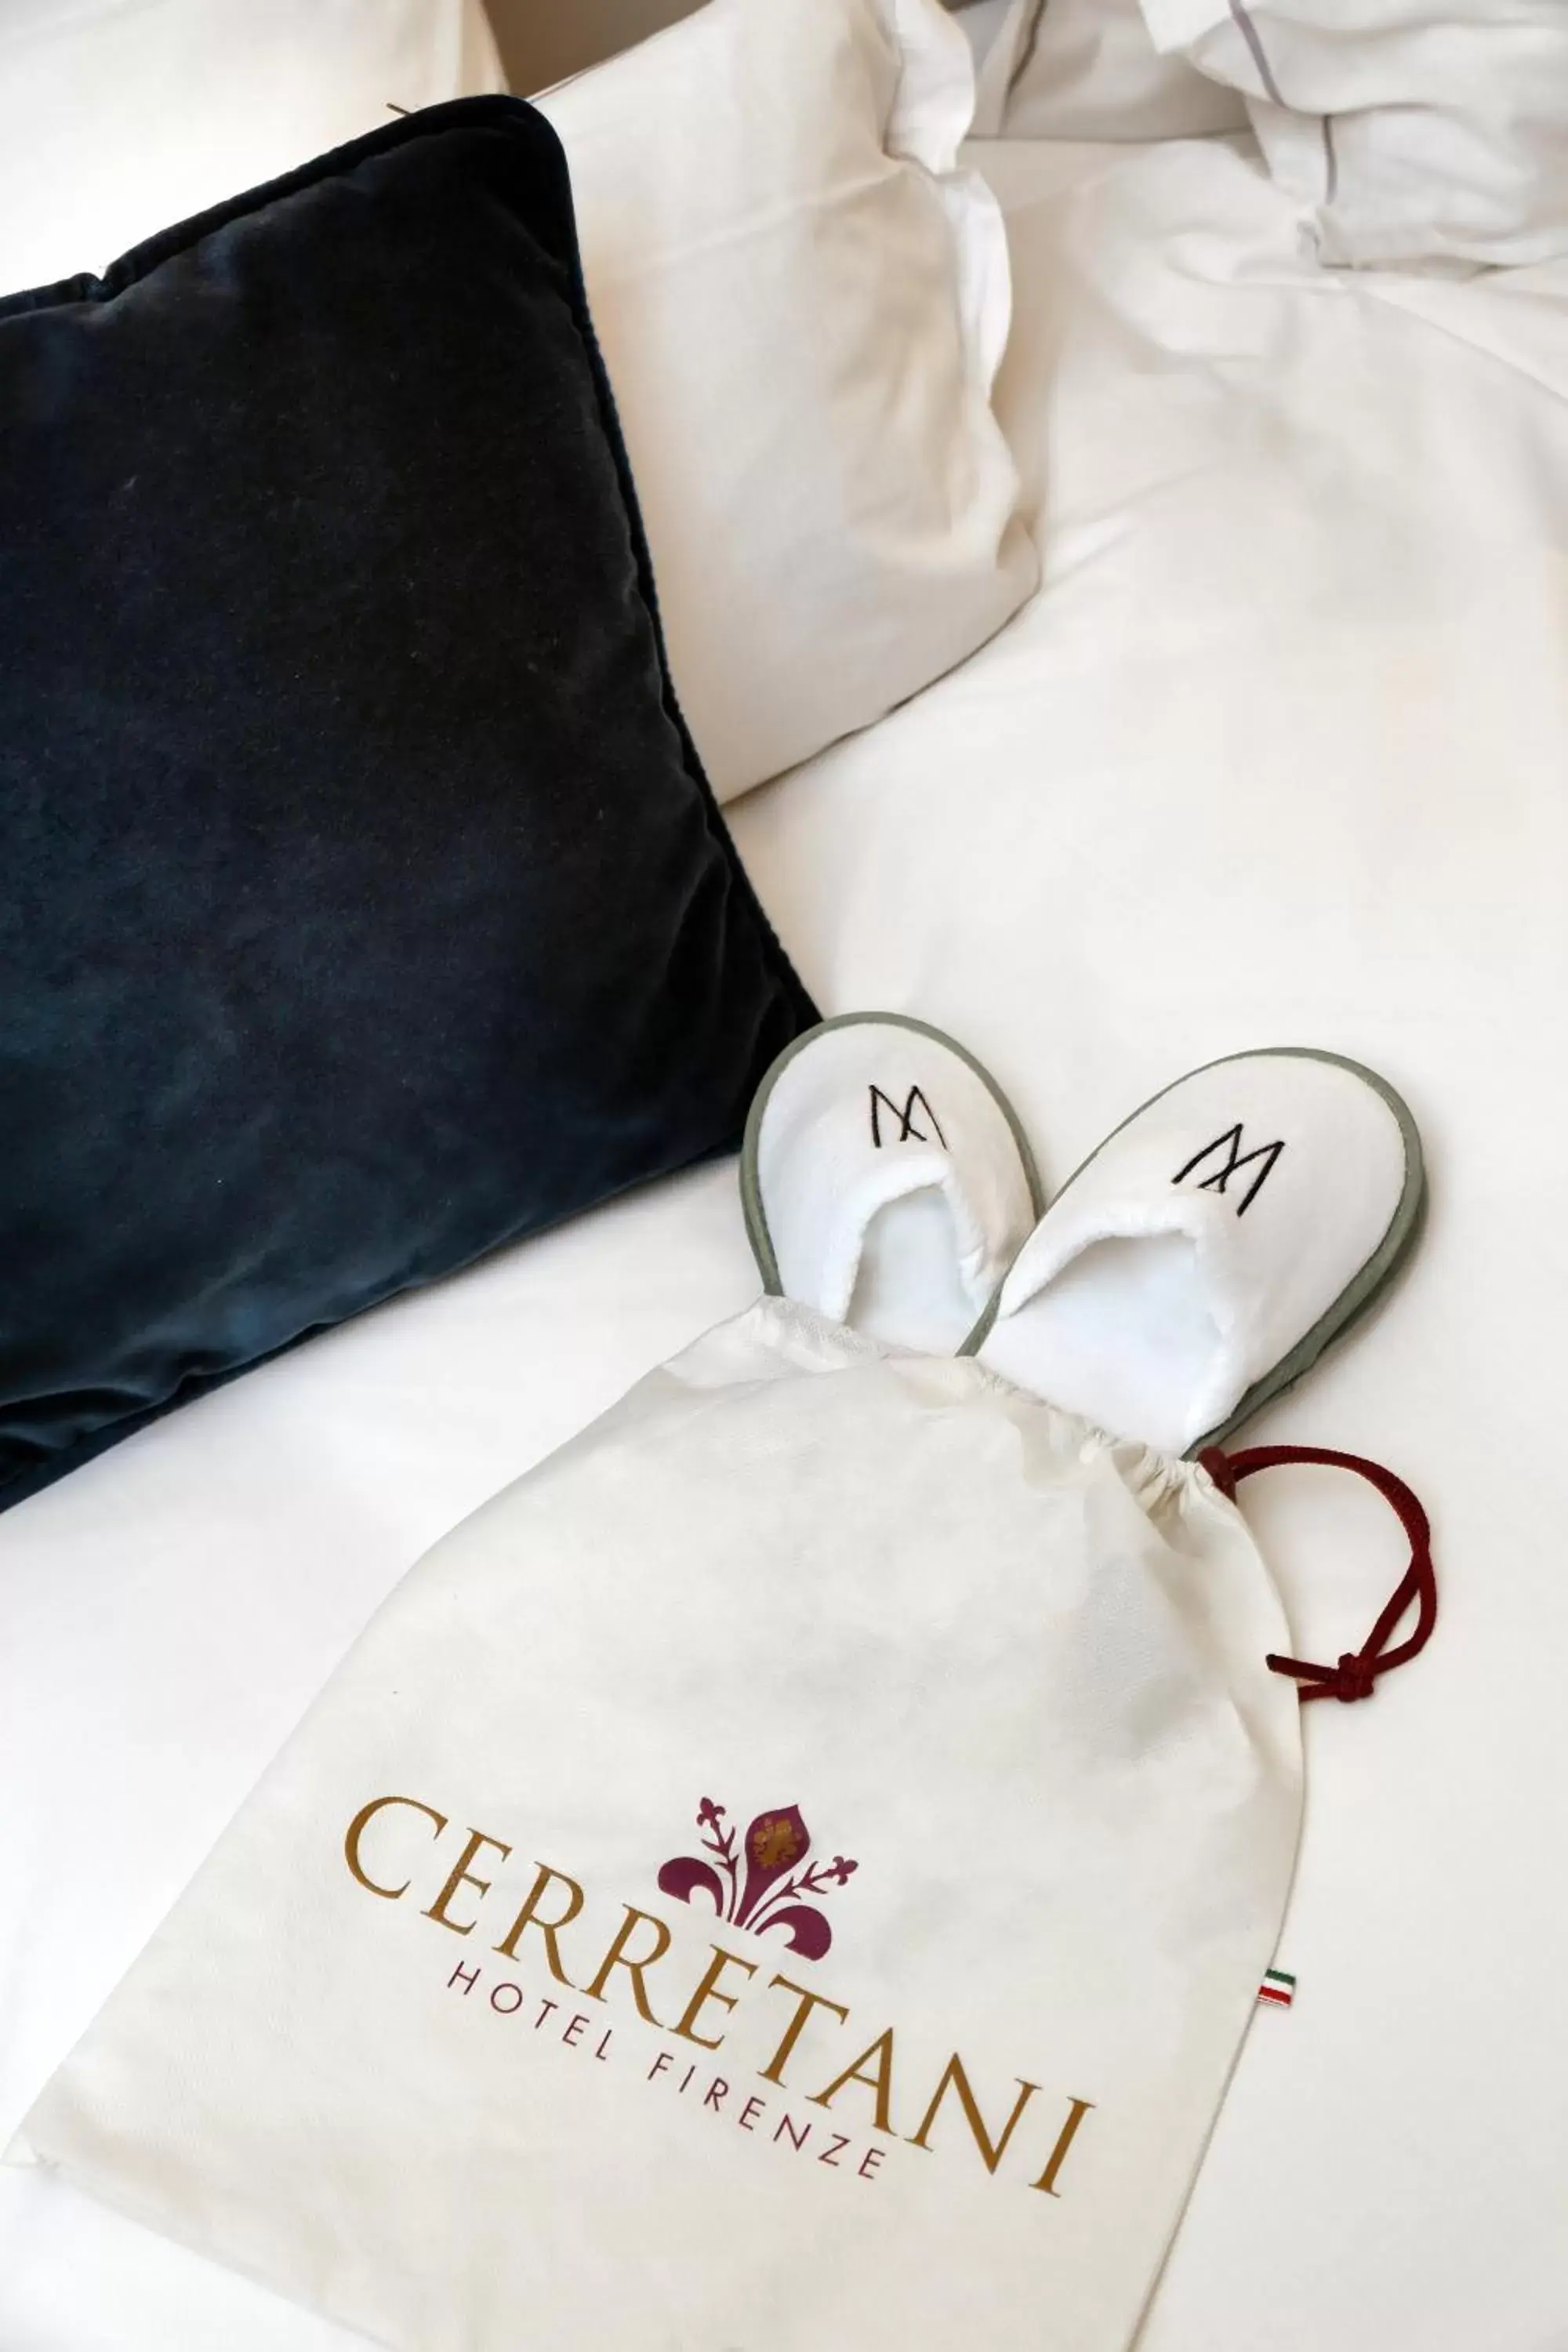 Decorative detail, Bed in Hotel Cerretani Firenze - MGallery Collection